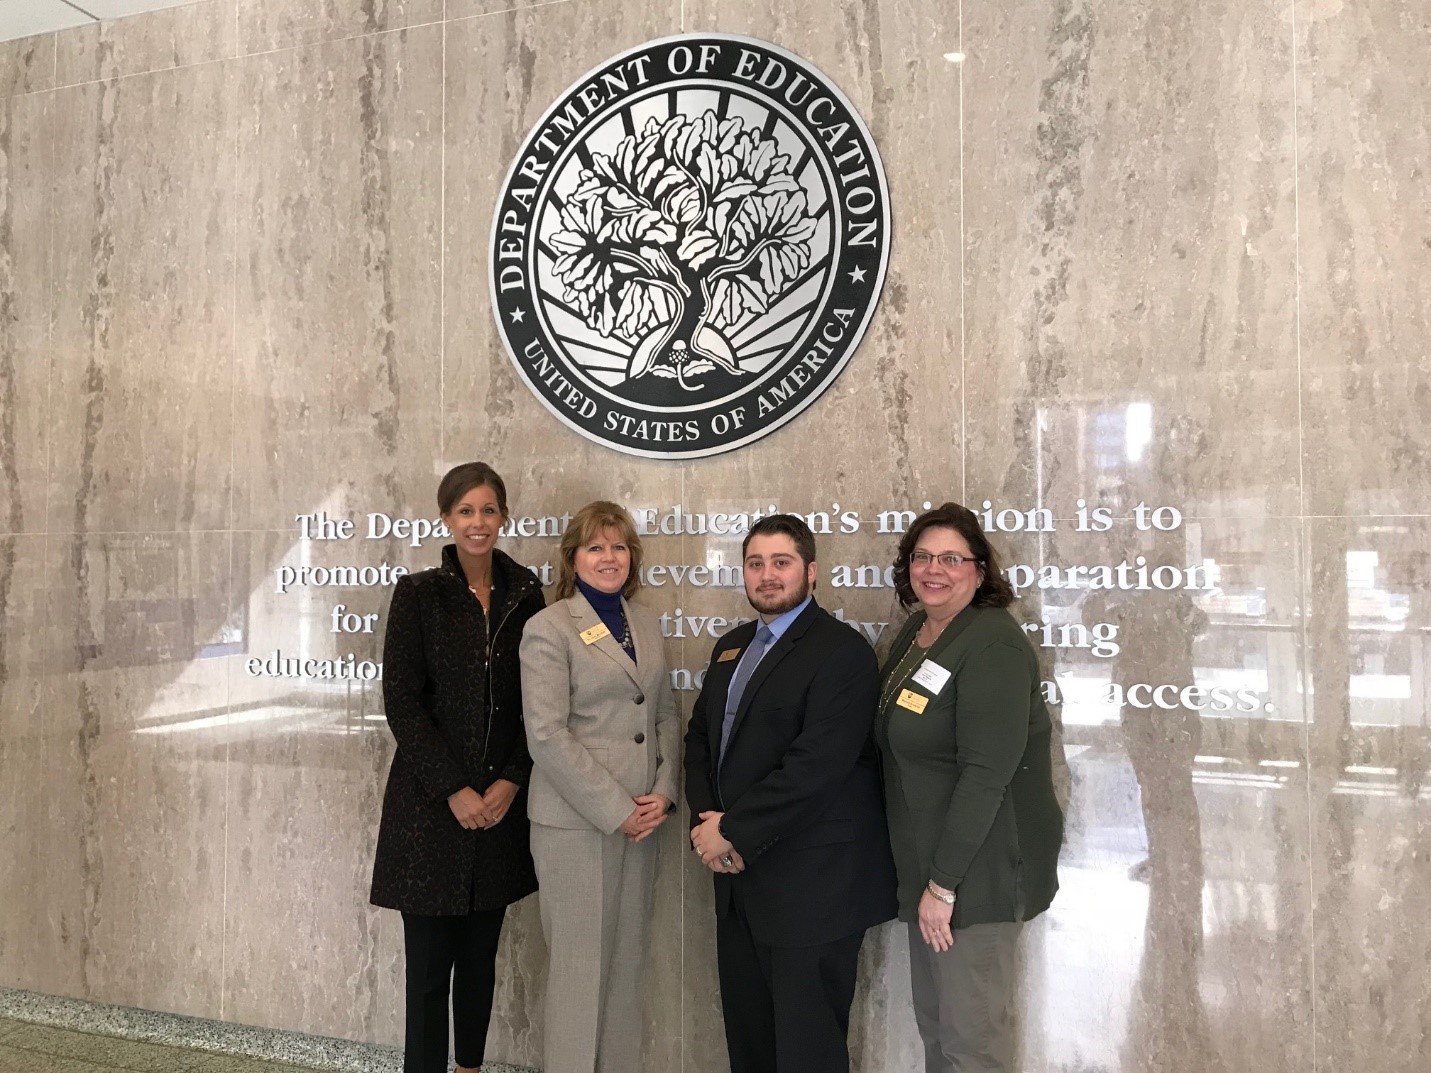 JJC Executive Director of Communications and Marketing Kelly Rohder-Tonelli, President Dr. Judy Mitchell, Board of Trustees Vice Chairwoman Maureen Broderick, and Student Trustee Sante Deserio